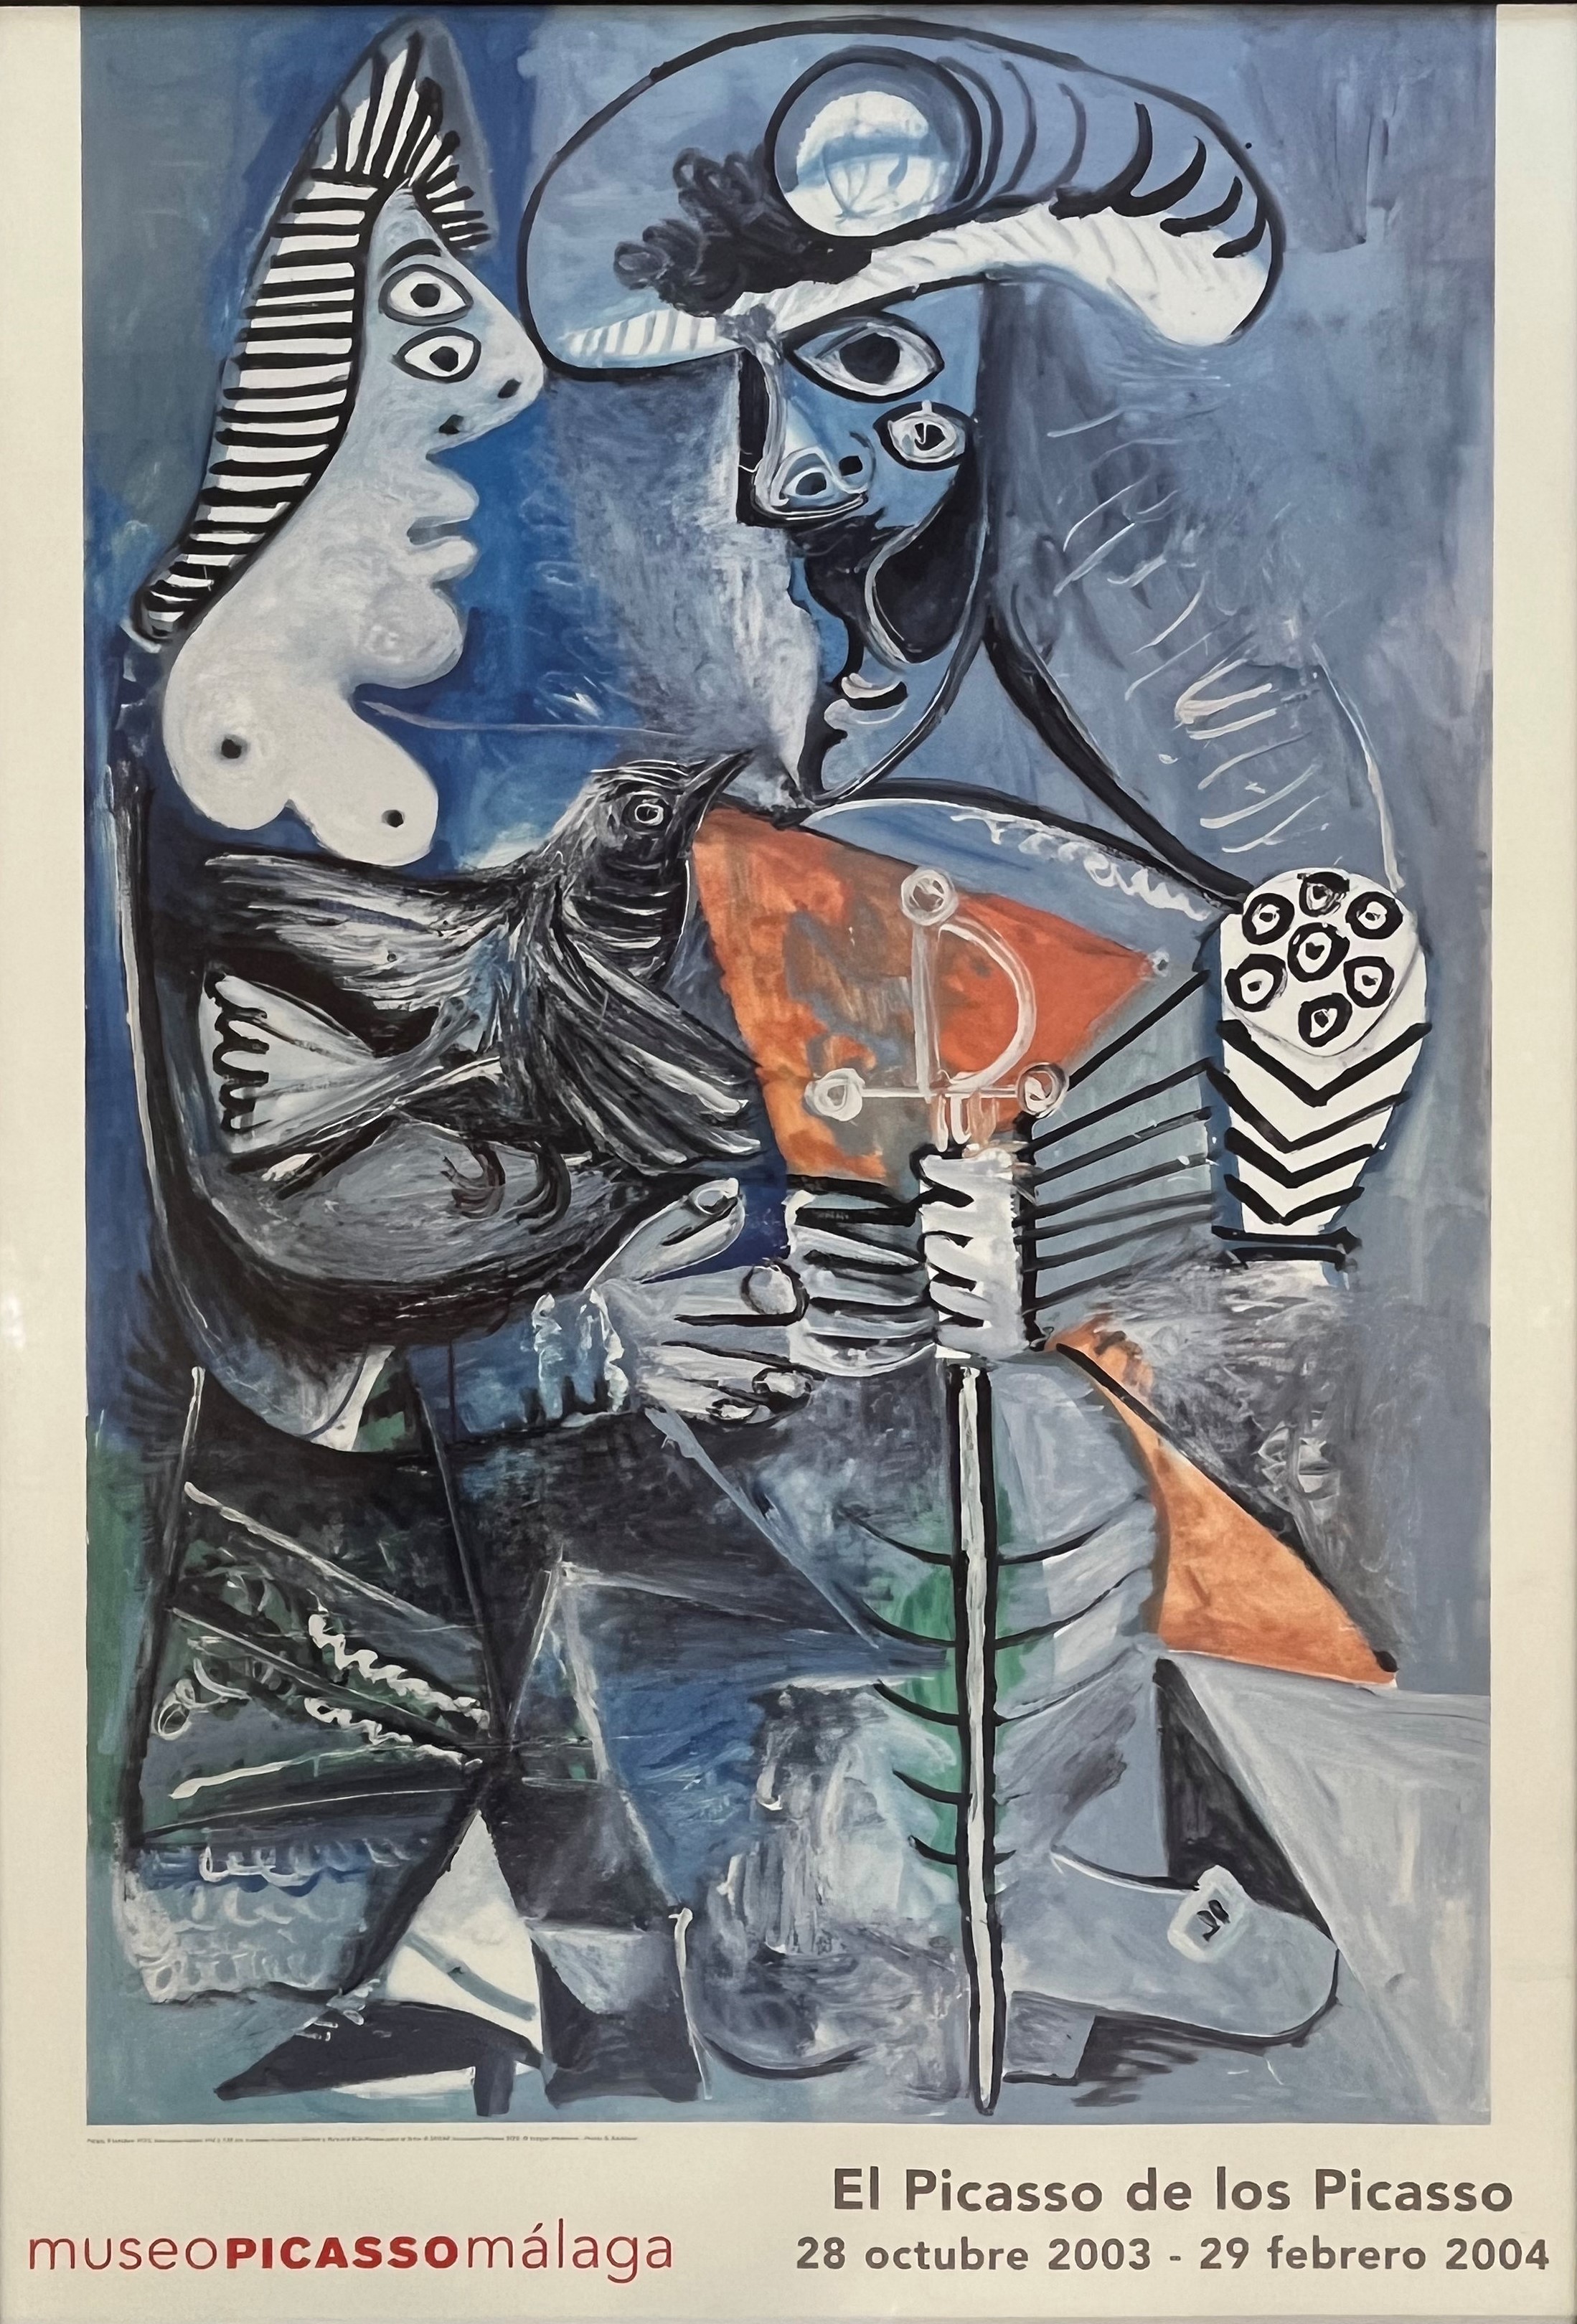 PABLO PICASSO - 2004 EXHIBITION POSTER FOR PICASSO MUSEUM - Image 2 of 6